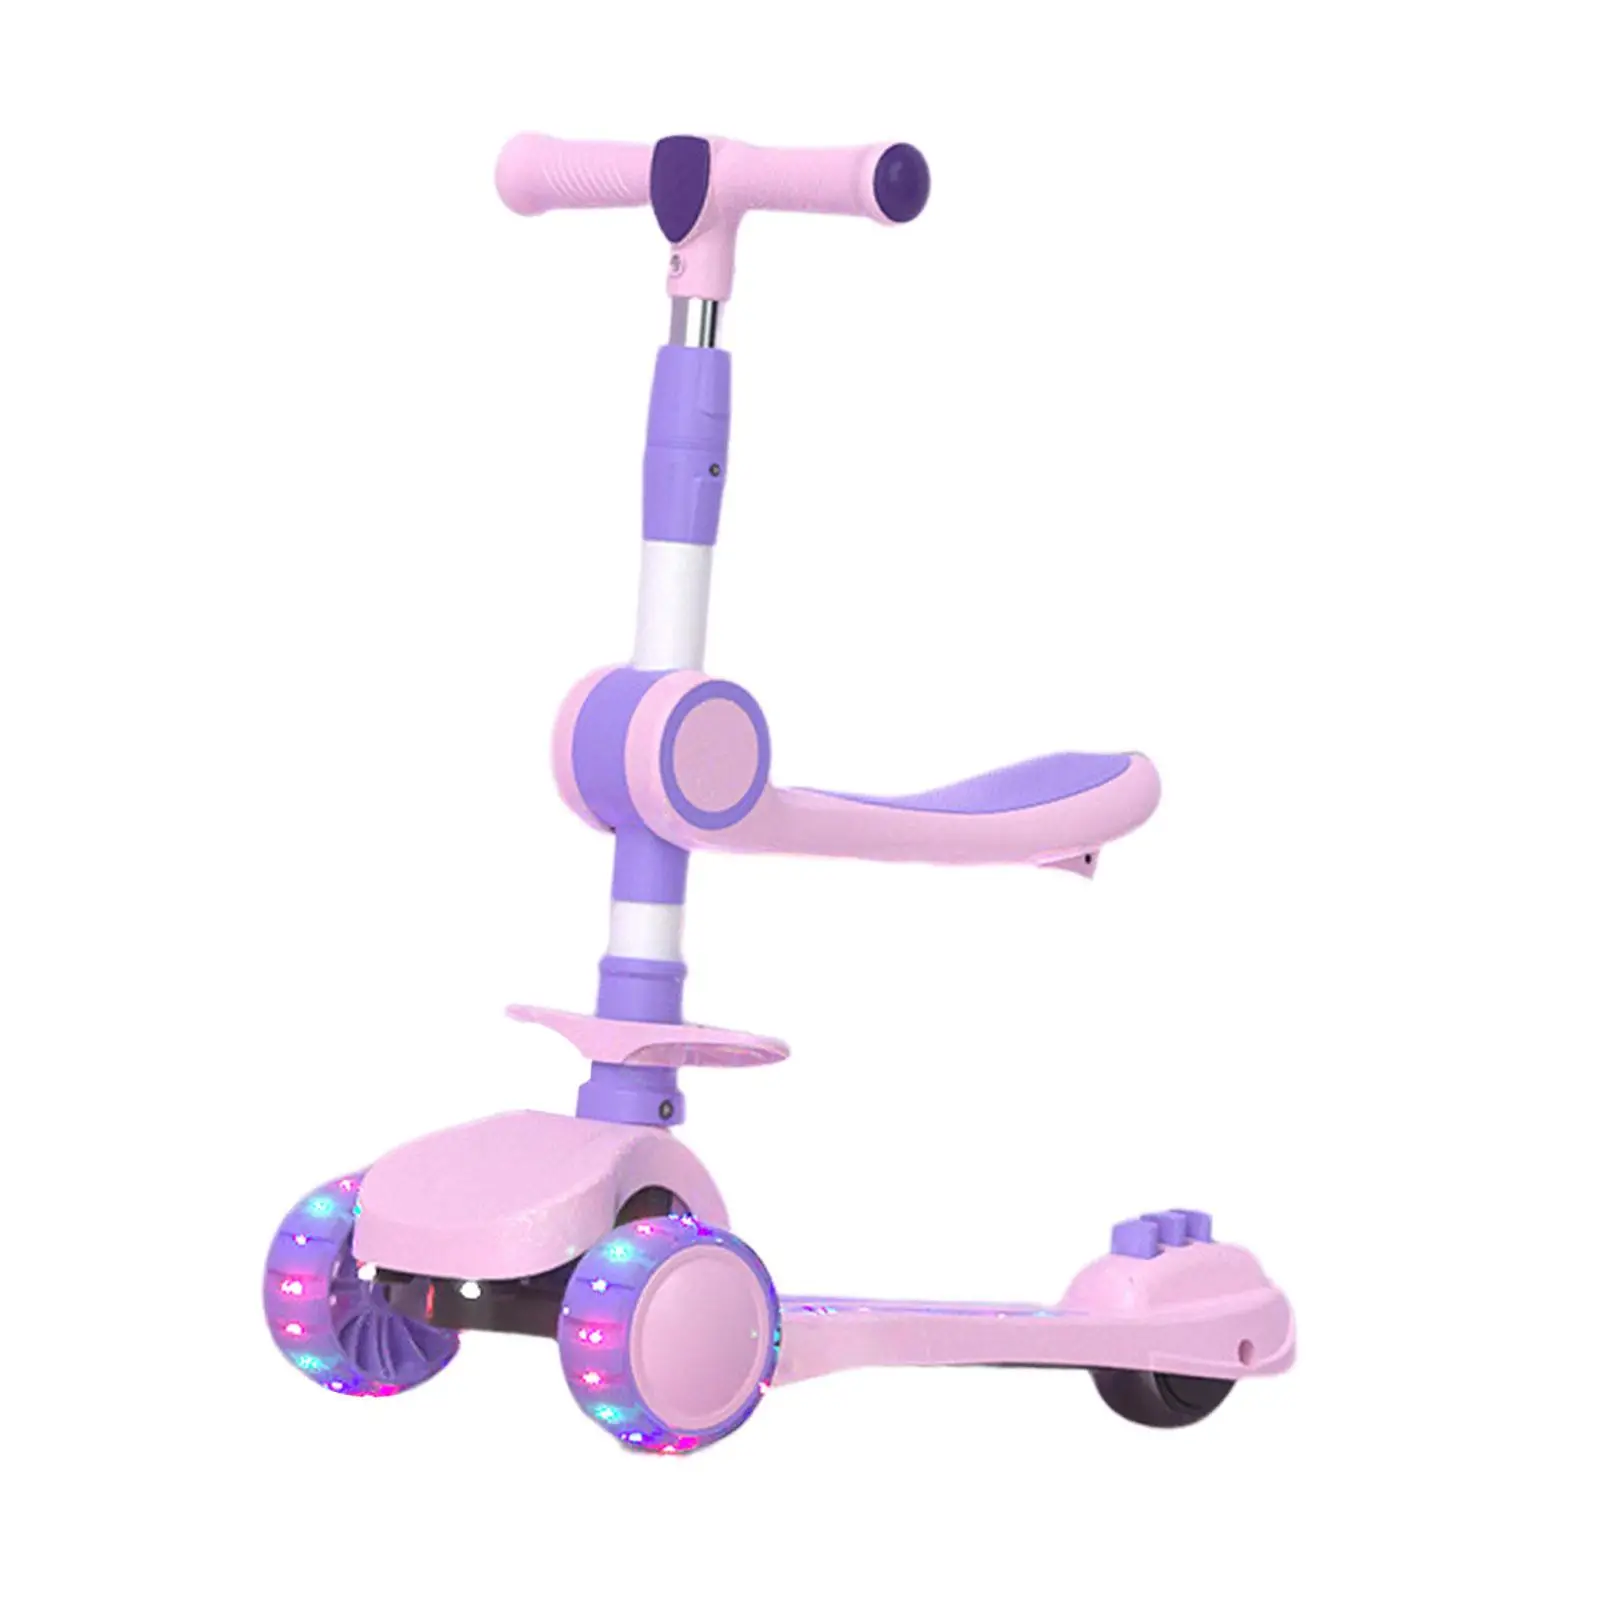 Self Balancing Kids Toys 4 Level Adjustable Height Triangular Structure Folding Flashing Kids Scooter for Activity Playing Yard